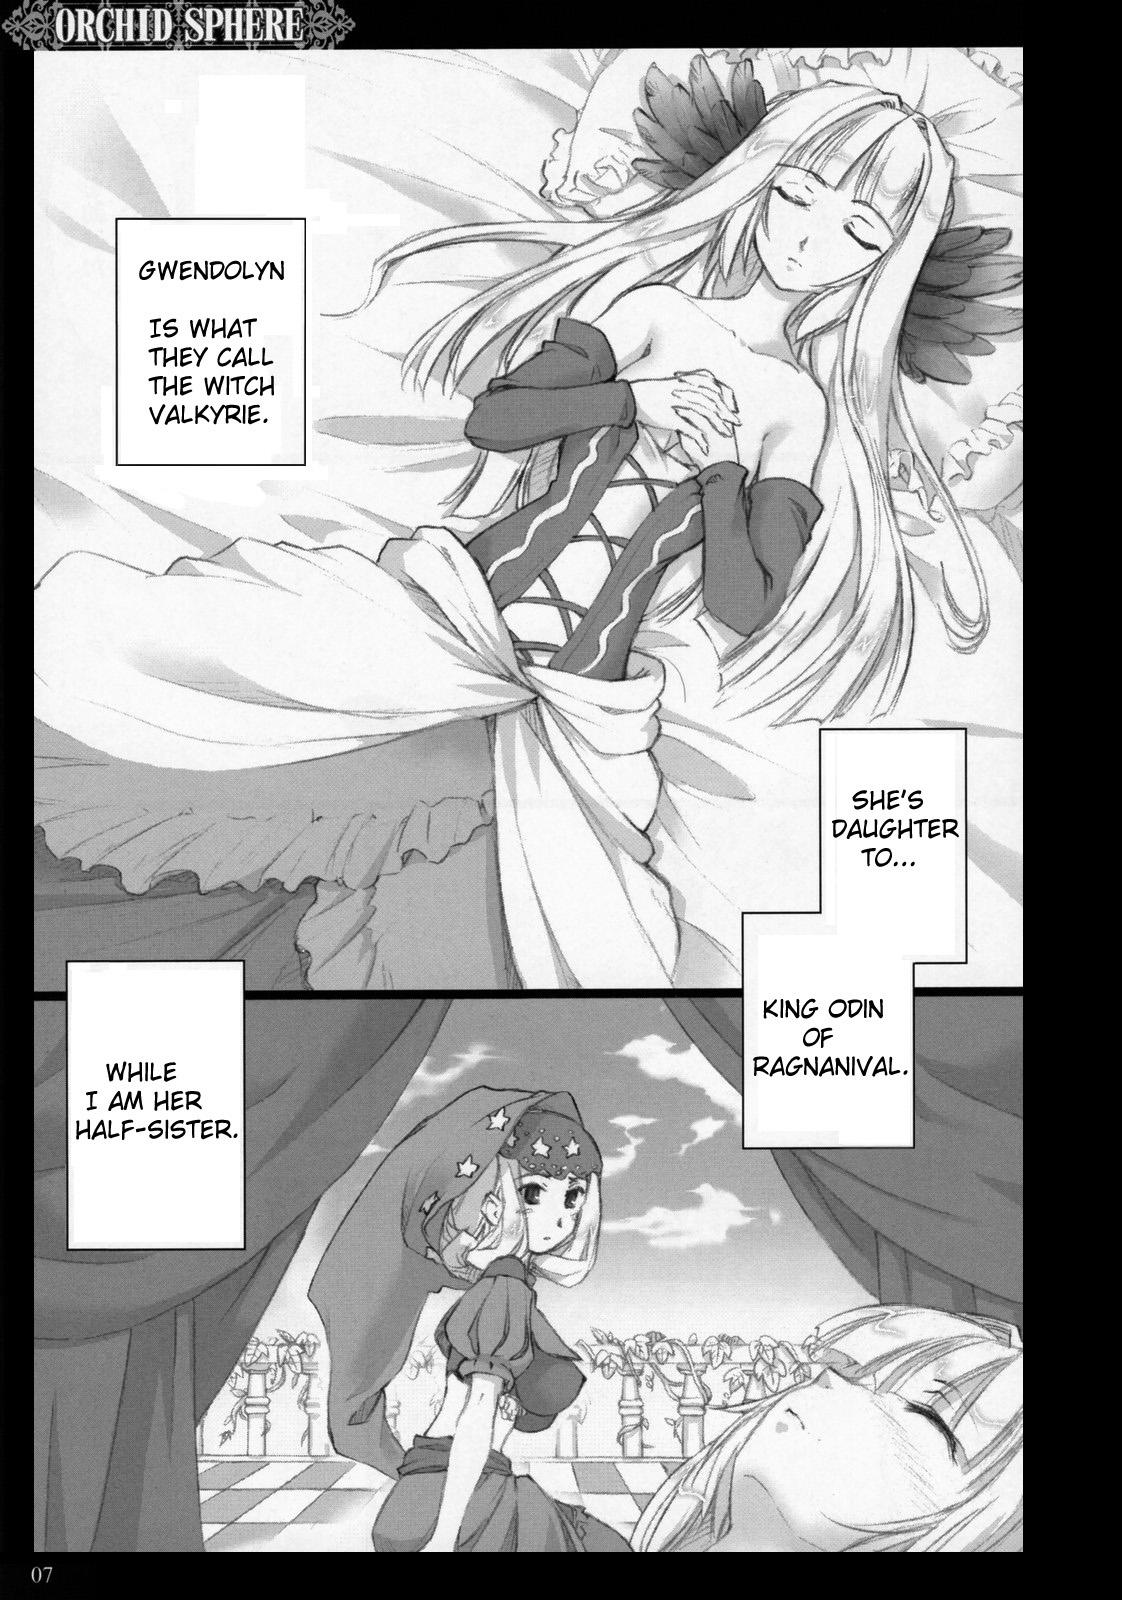 Toys Orchid Sphere - Odin sphere Riding - Page 6